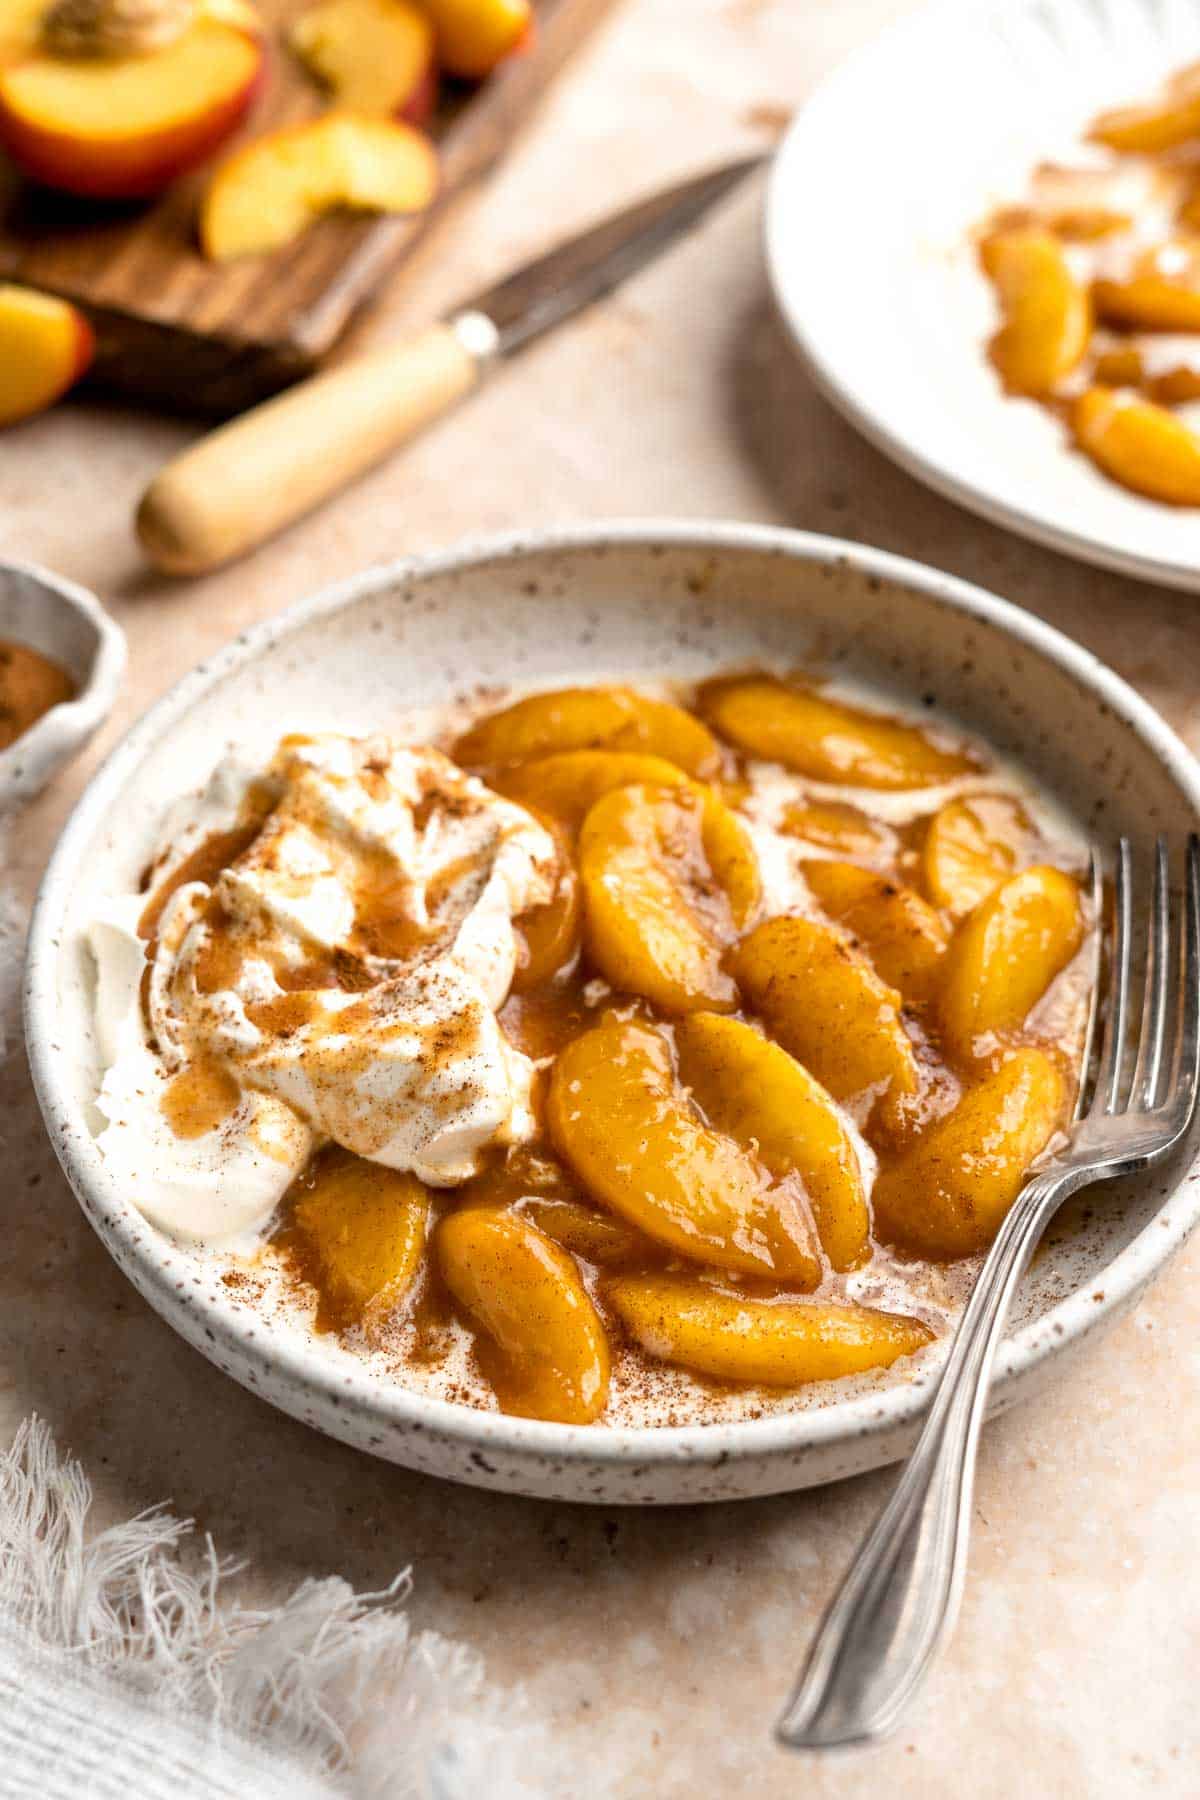 Peaches and Cream is an old-fashioned, no bake dessert that is simple to make with layers of tender, stewed peaches and homemade whipped cream. | aheadofthyme.com